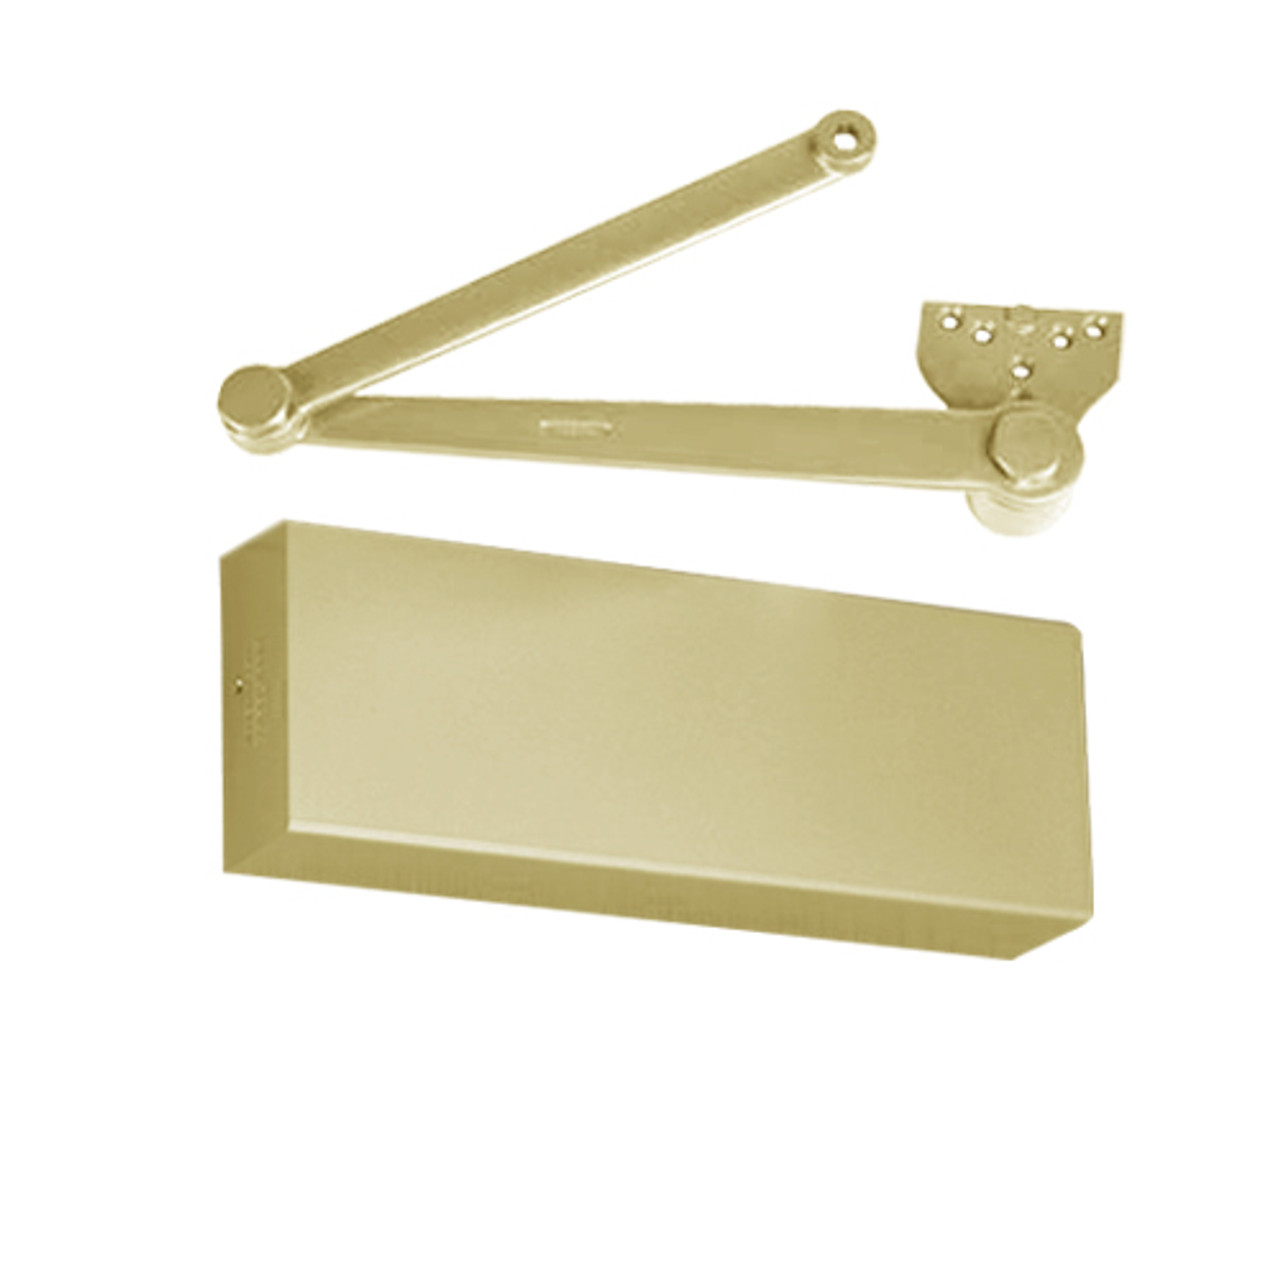 PRO9500HM-LH-696 Norton 9500 Series Hold Open Cast Iron Door Closer with Parallel Rigid Offset Arm in Gold Finish